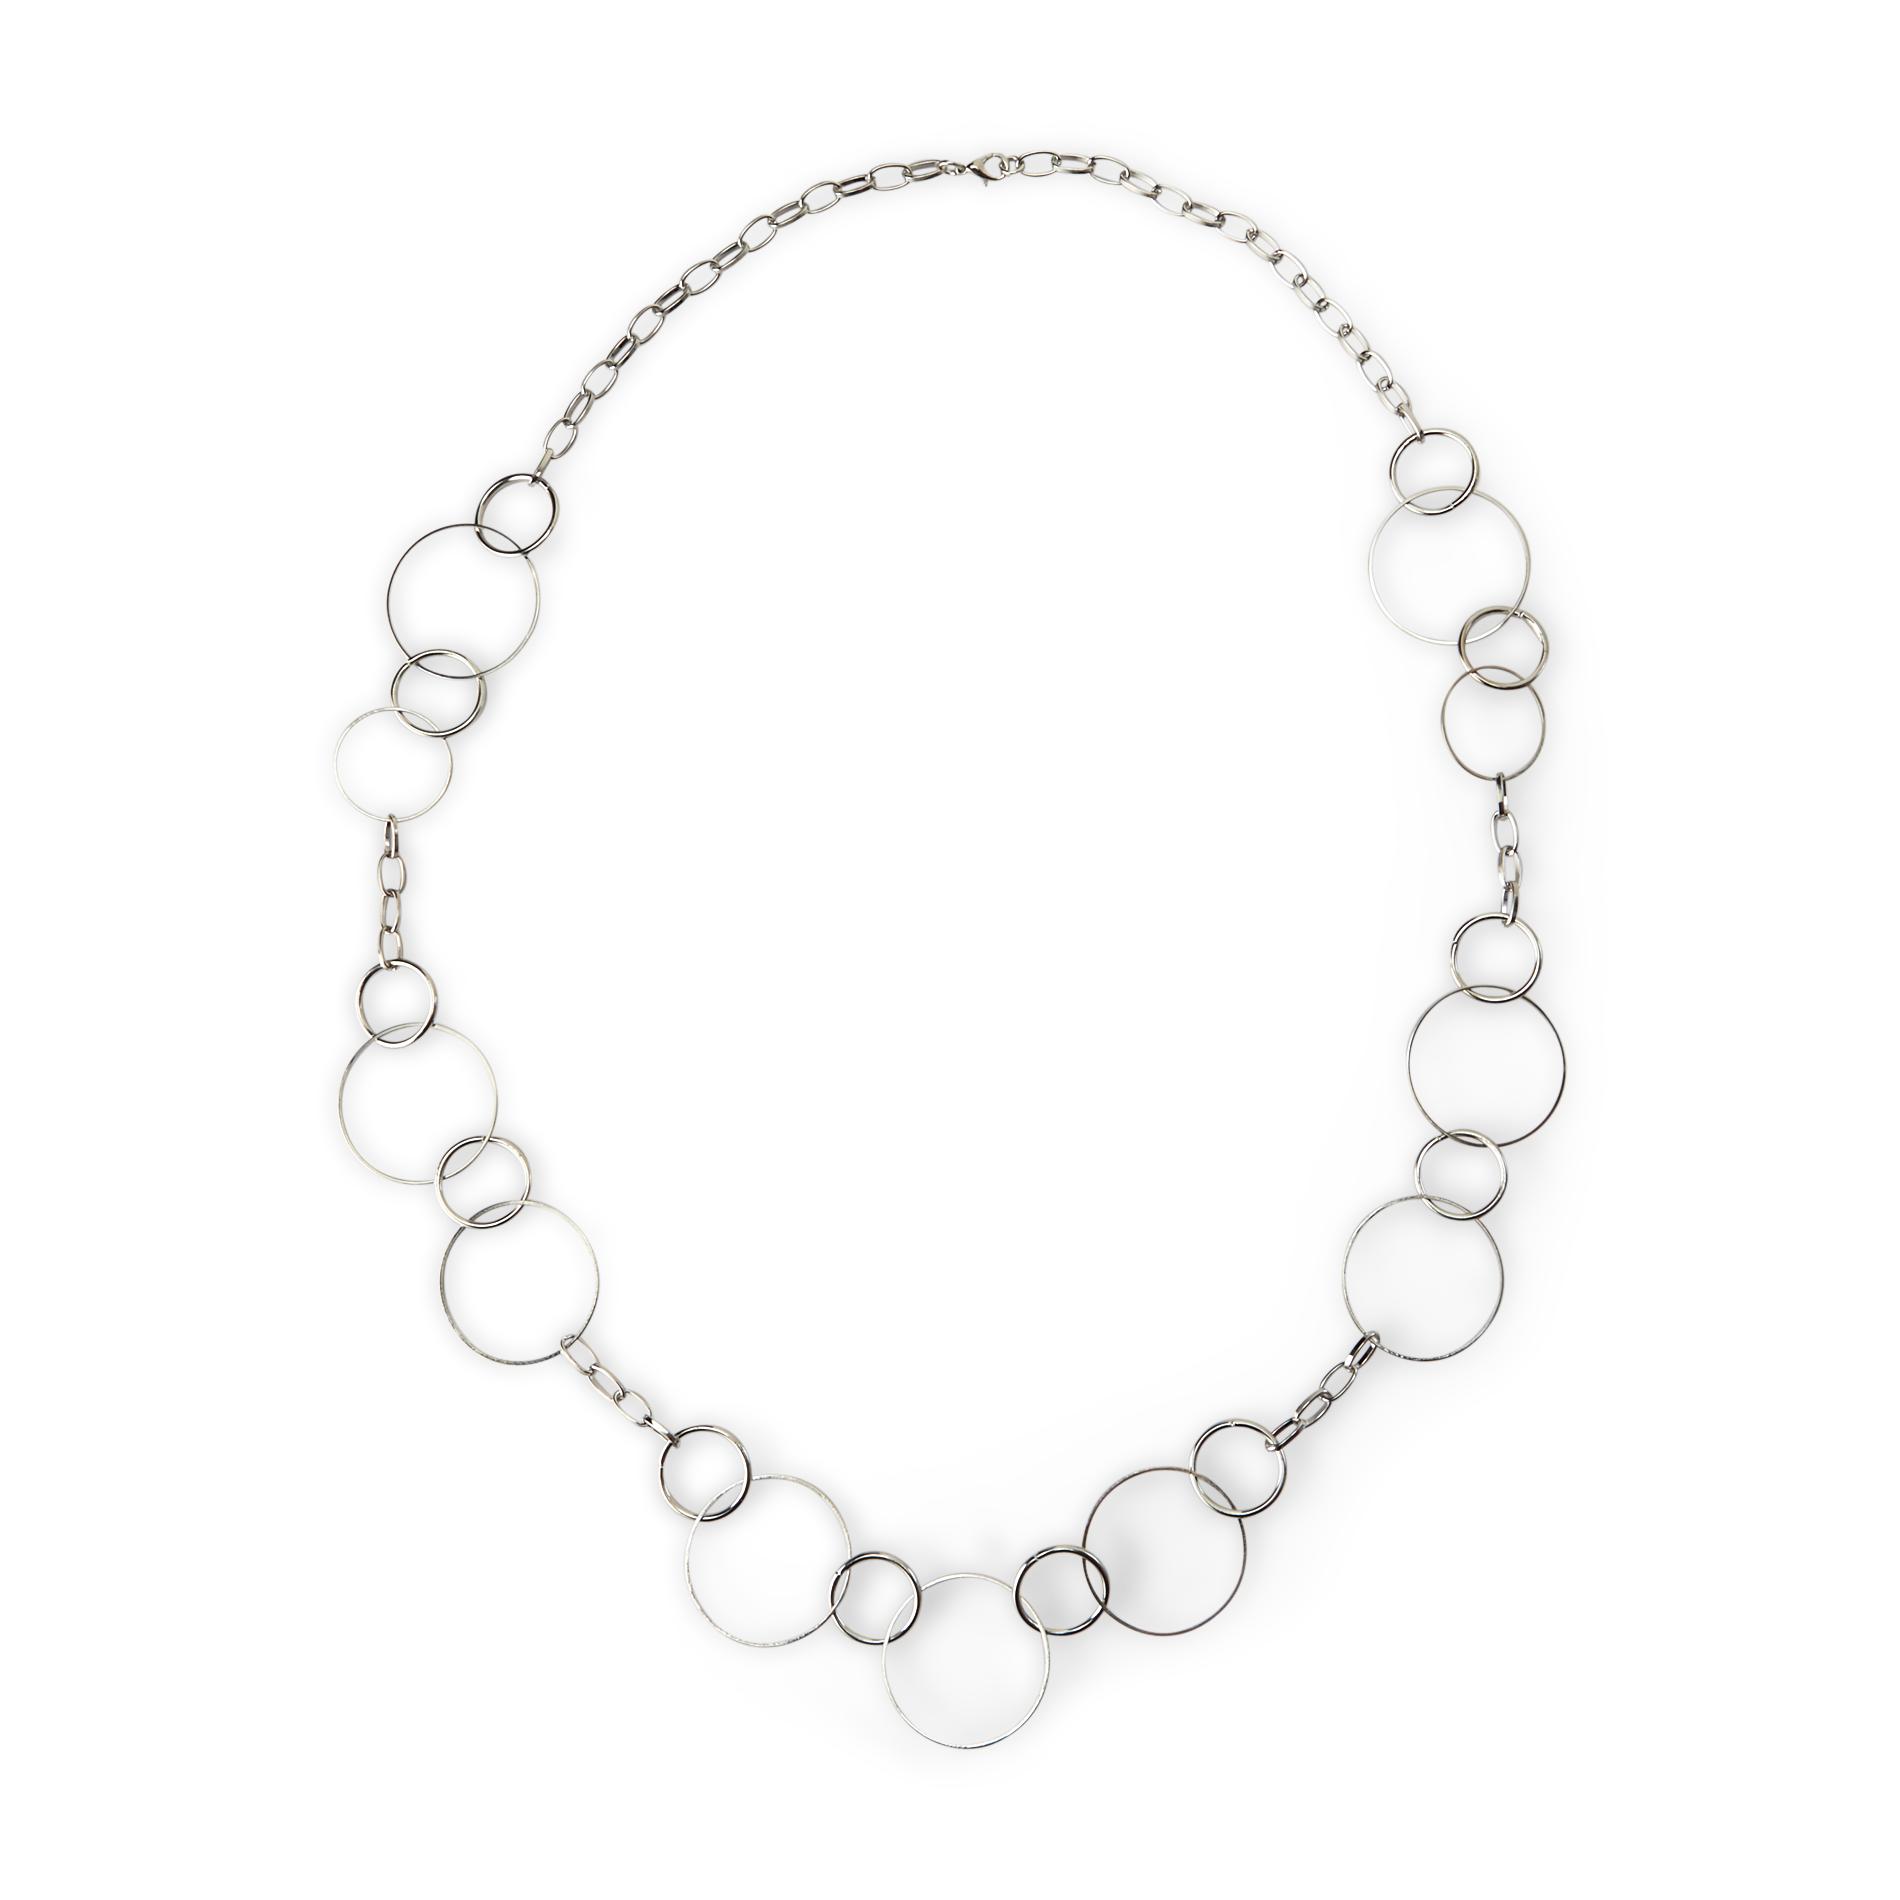 Attention Women's Oval-Link & Rings Necklace - Silvertone